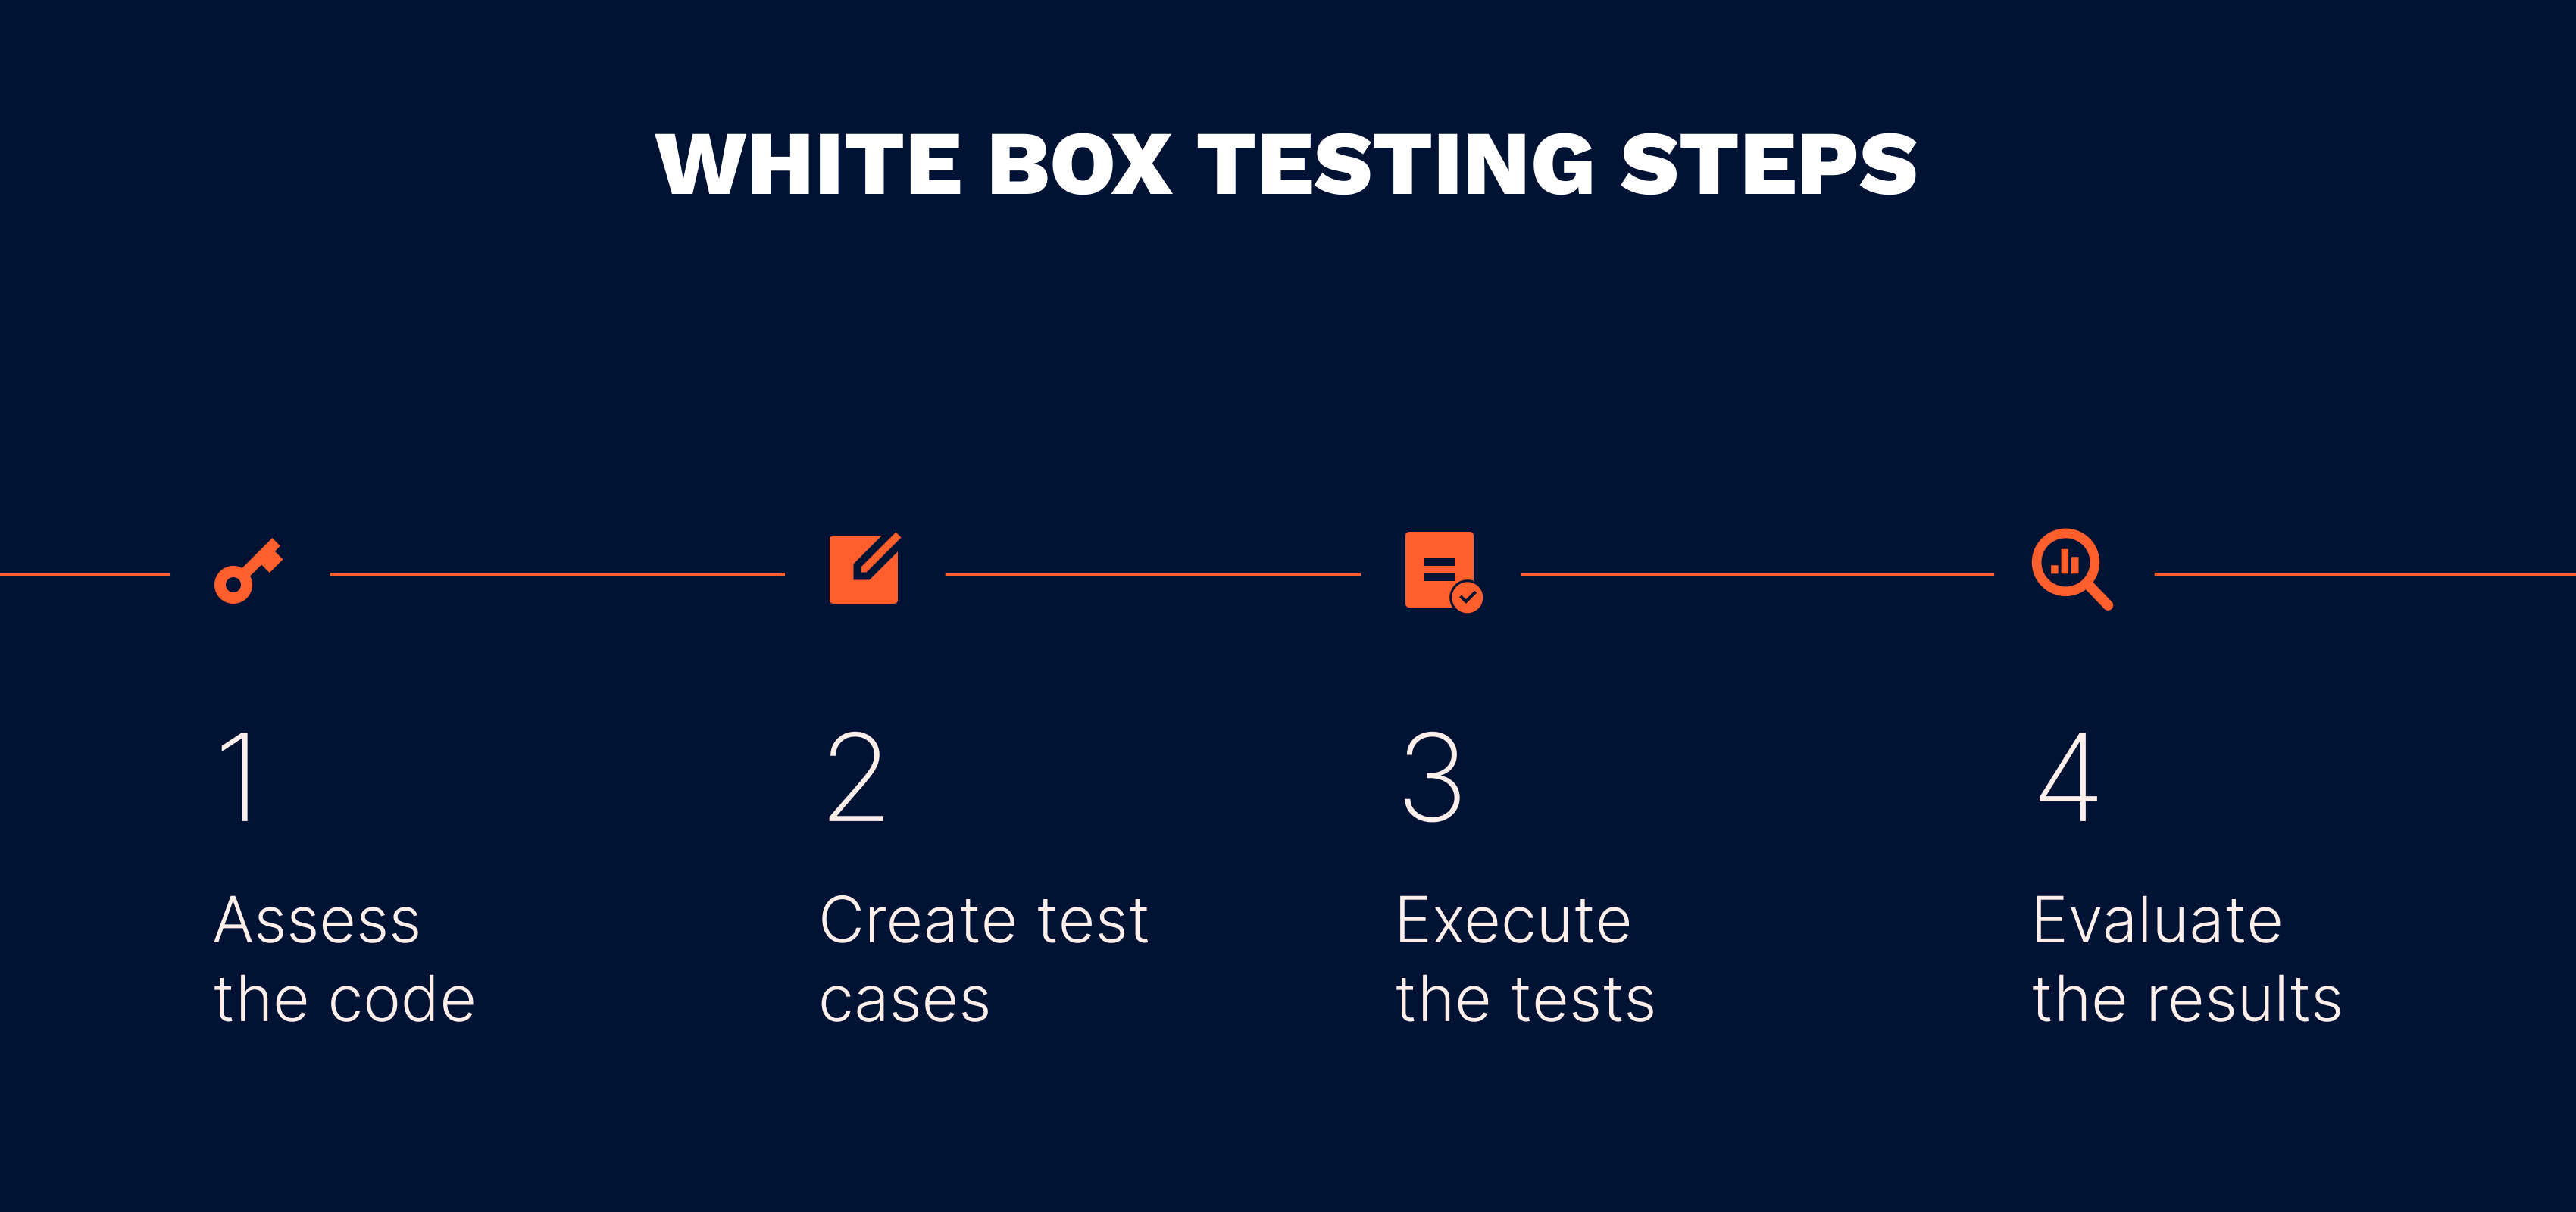 White box testing examples in software engineering